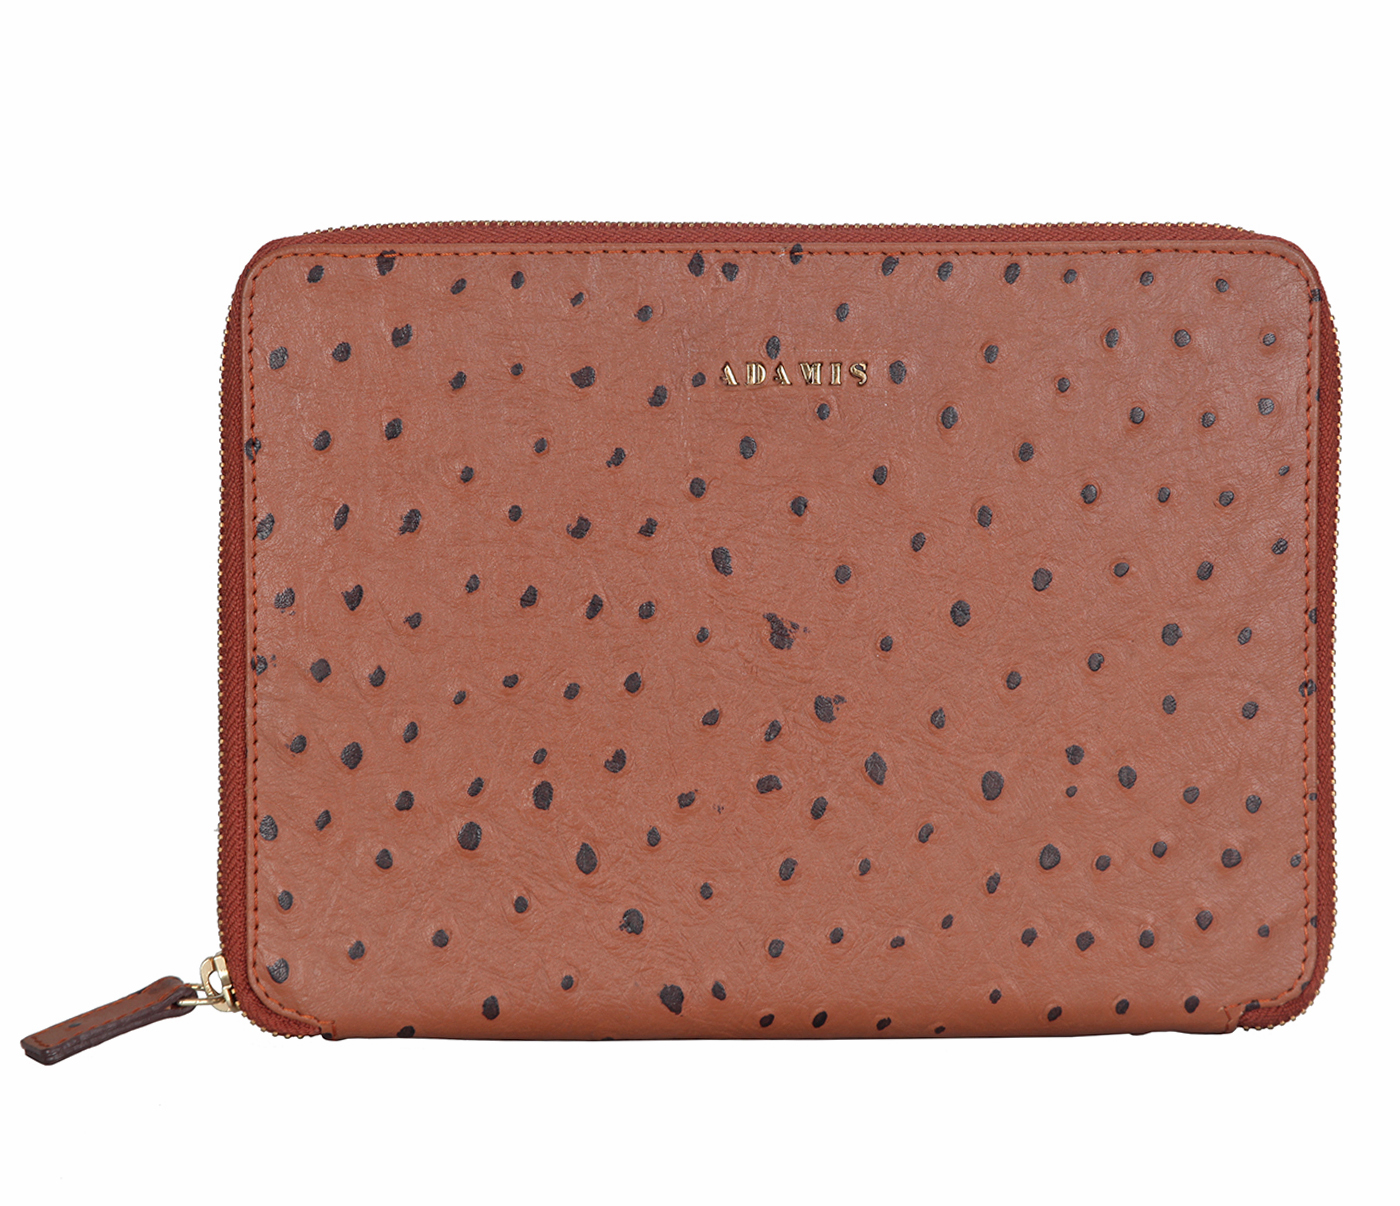 W279--Ipad air cover with magnetic tray in Genuine Leather - Tan